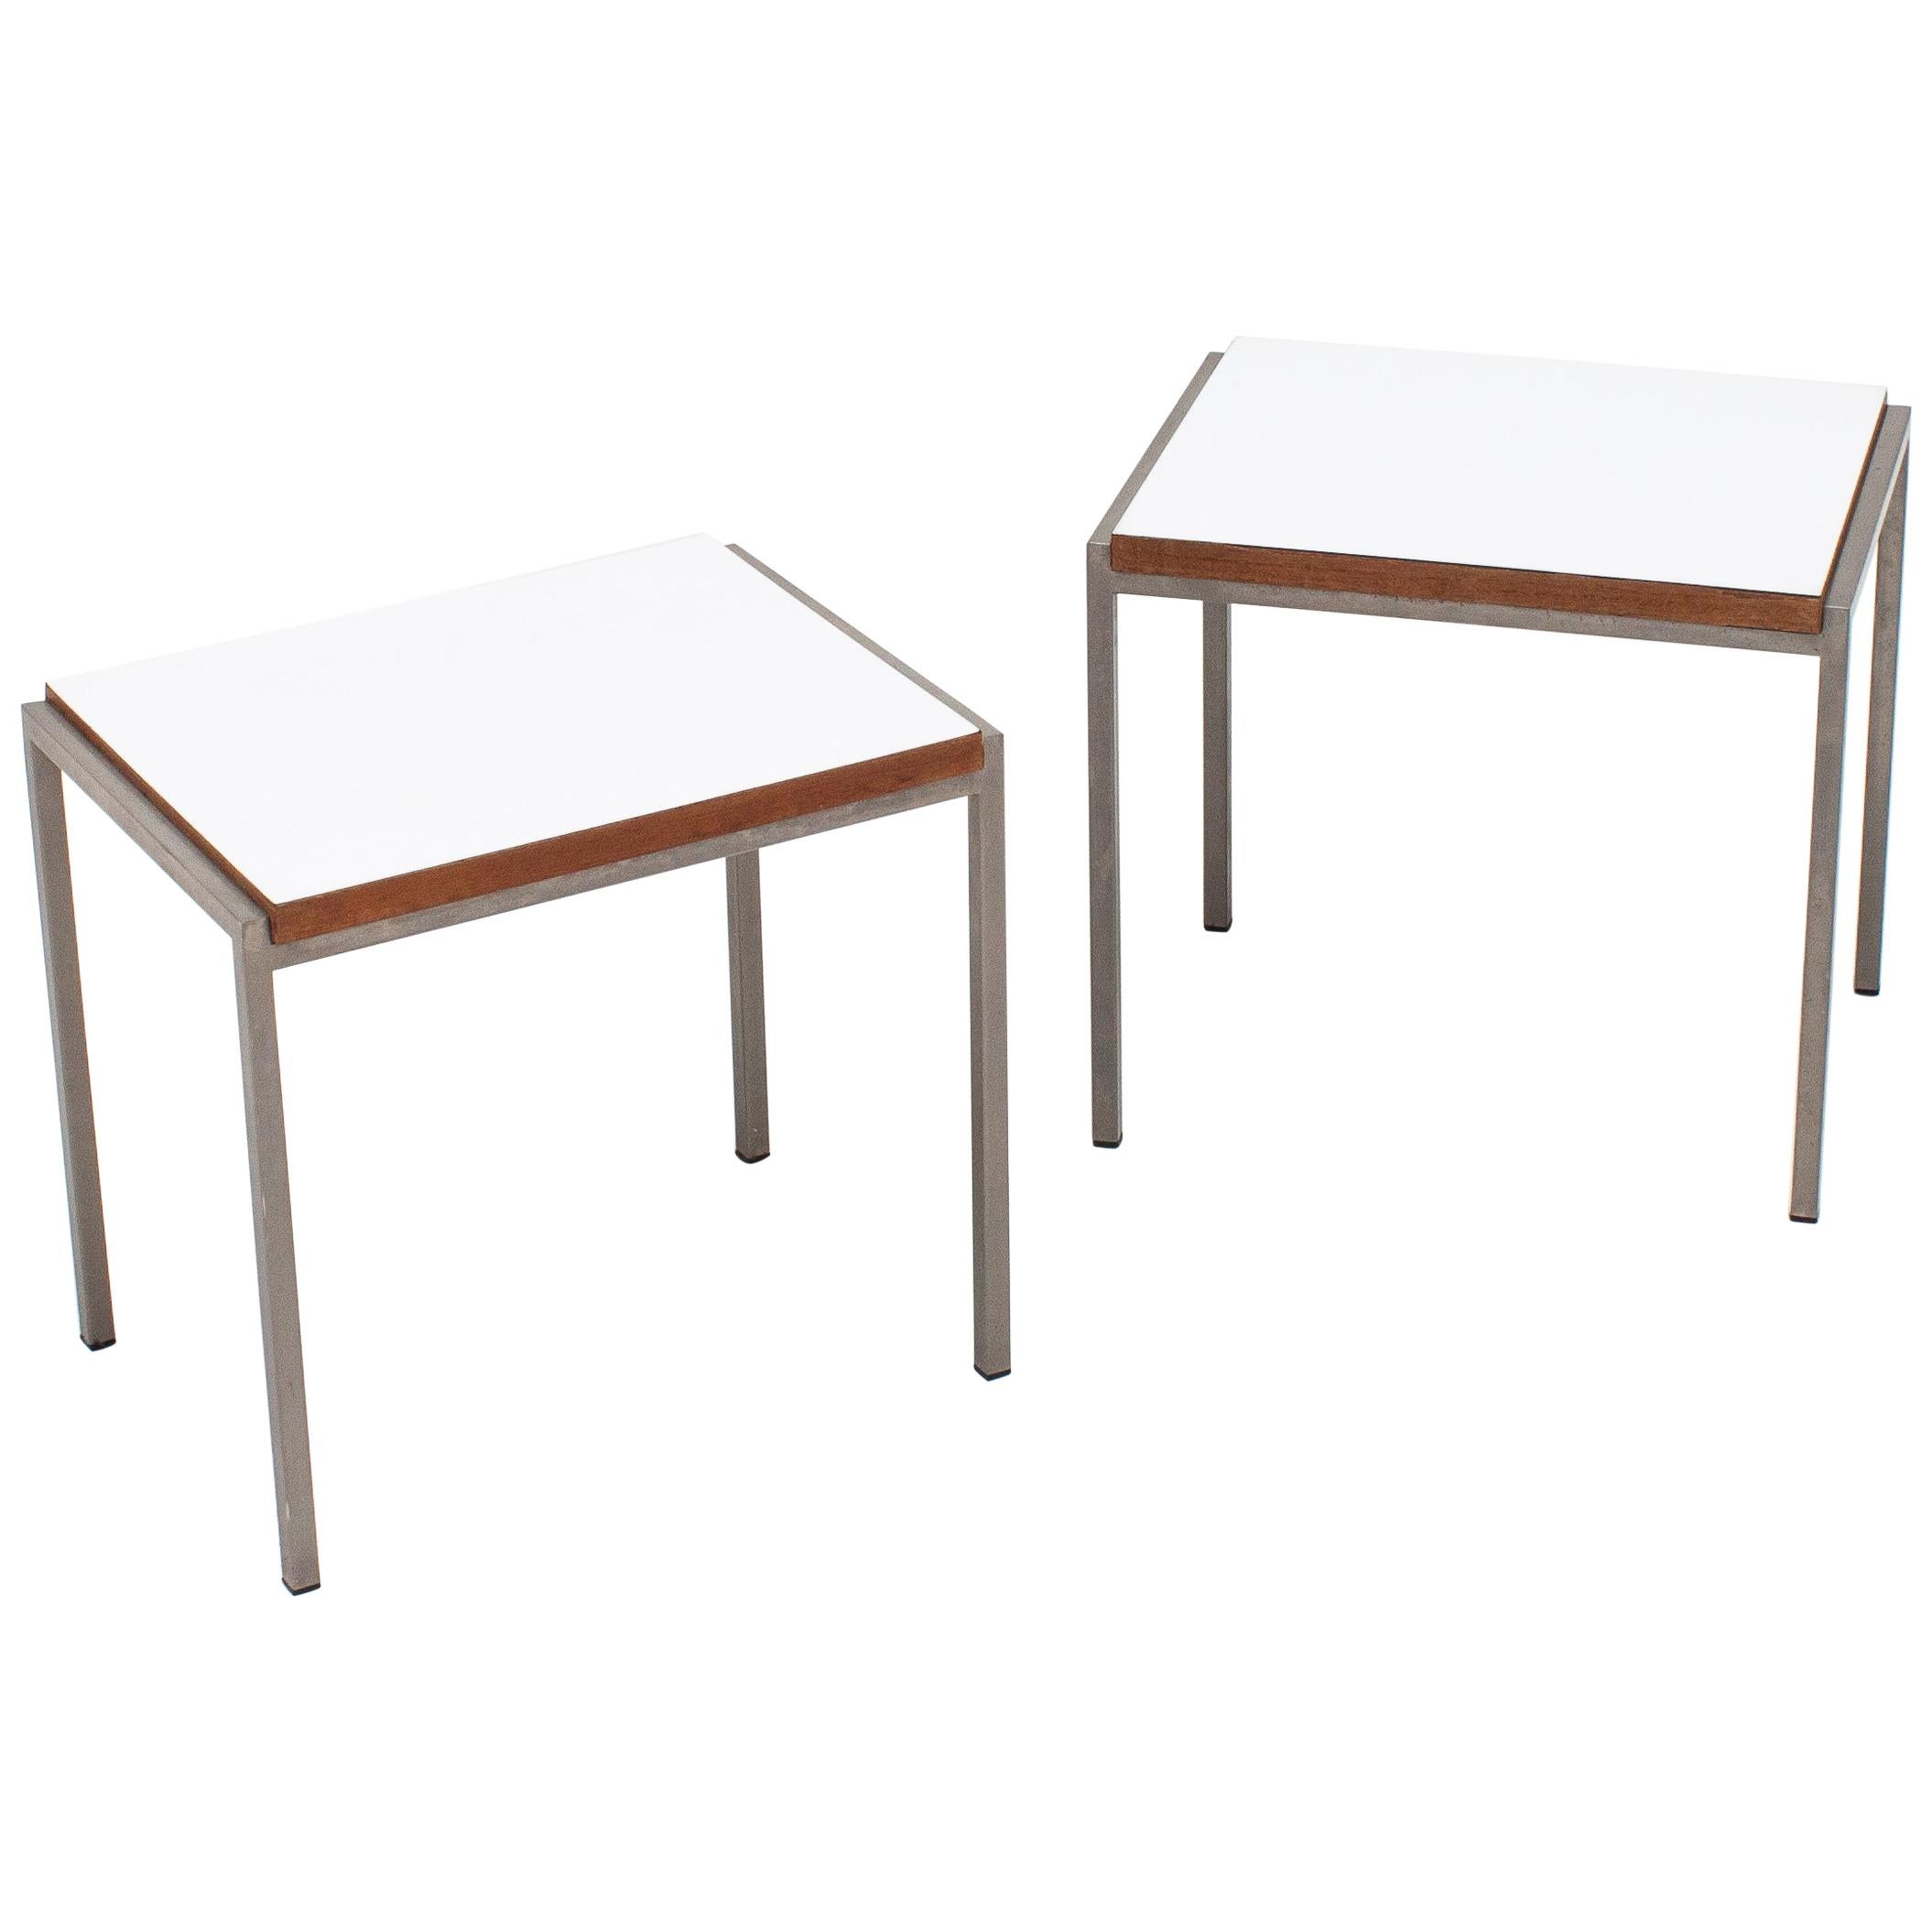 Pair of Cees Braakman Side Tables From The 'Japanese series' For UMS Pastoe